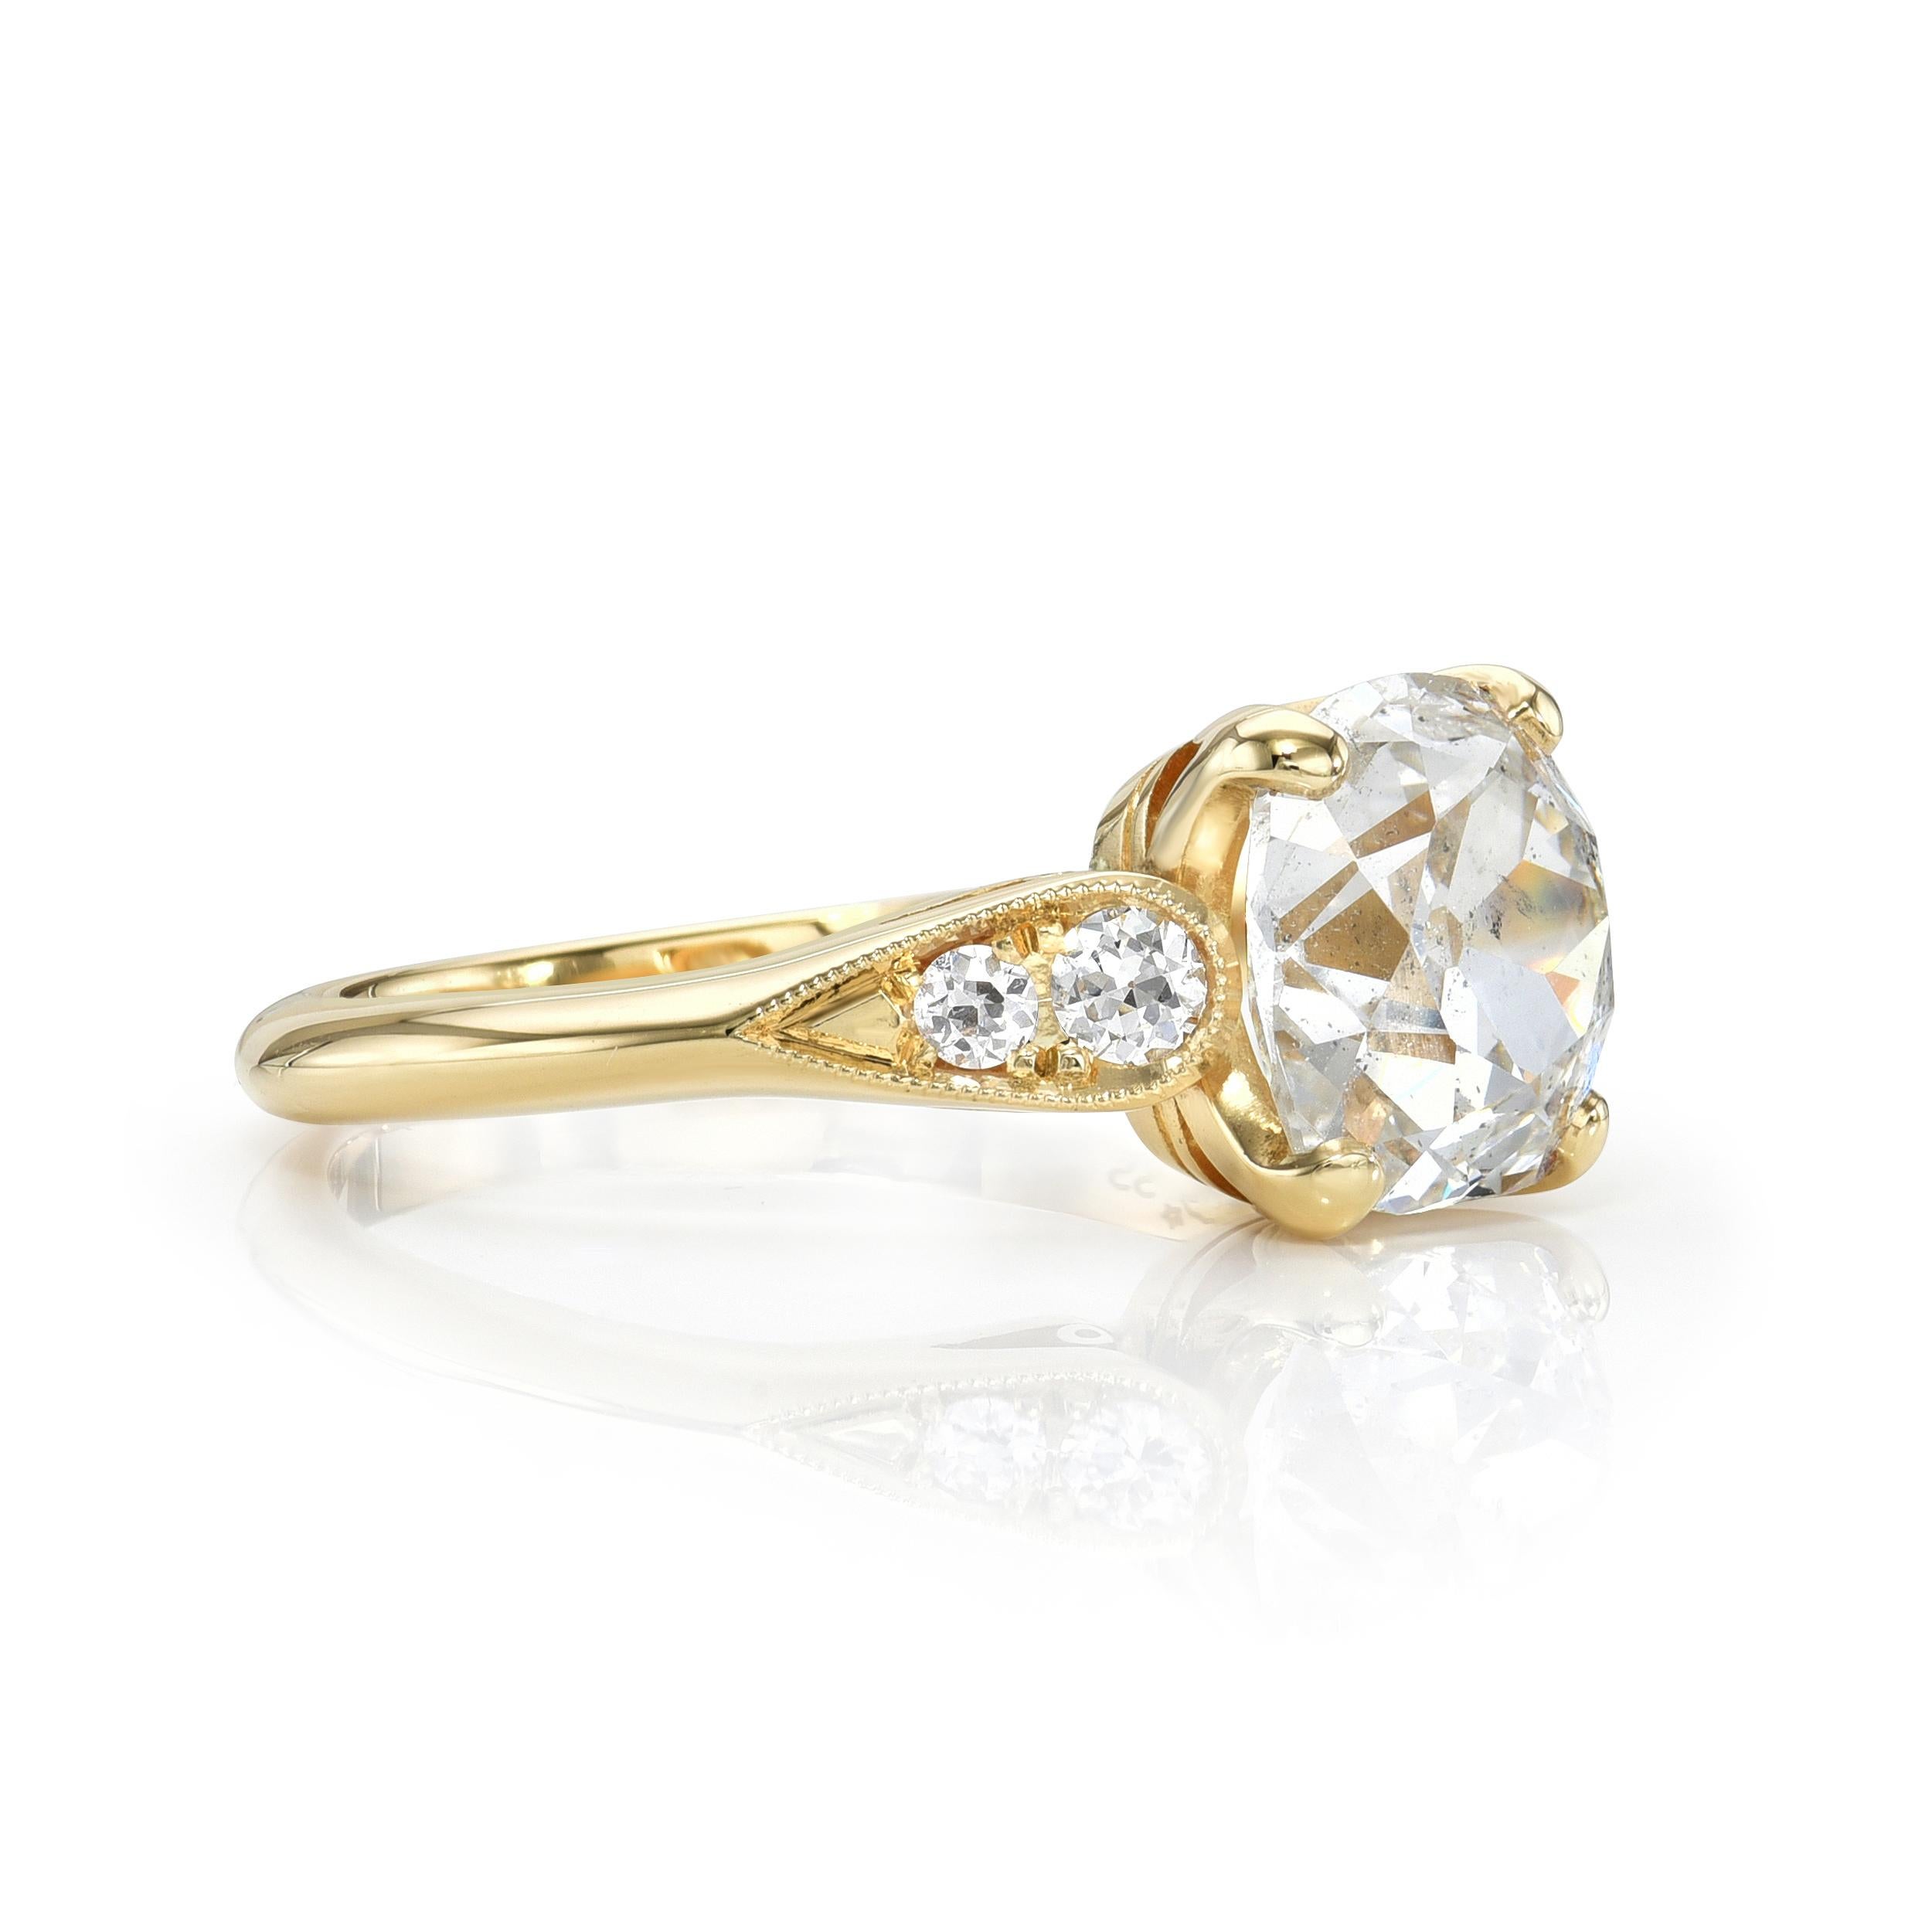 2.35ct L/VS1 GIA certified antique cushion cut diamond with 0.15ctw old European cut accent diamonds prong set in a handcrafted 18K yellow gold mounting.